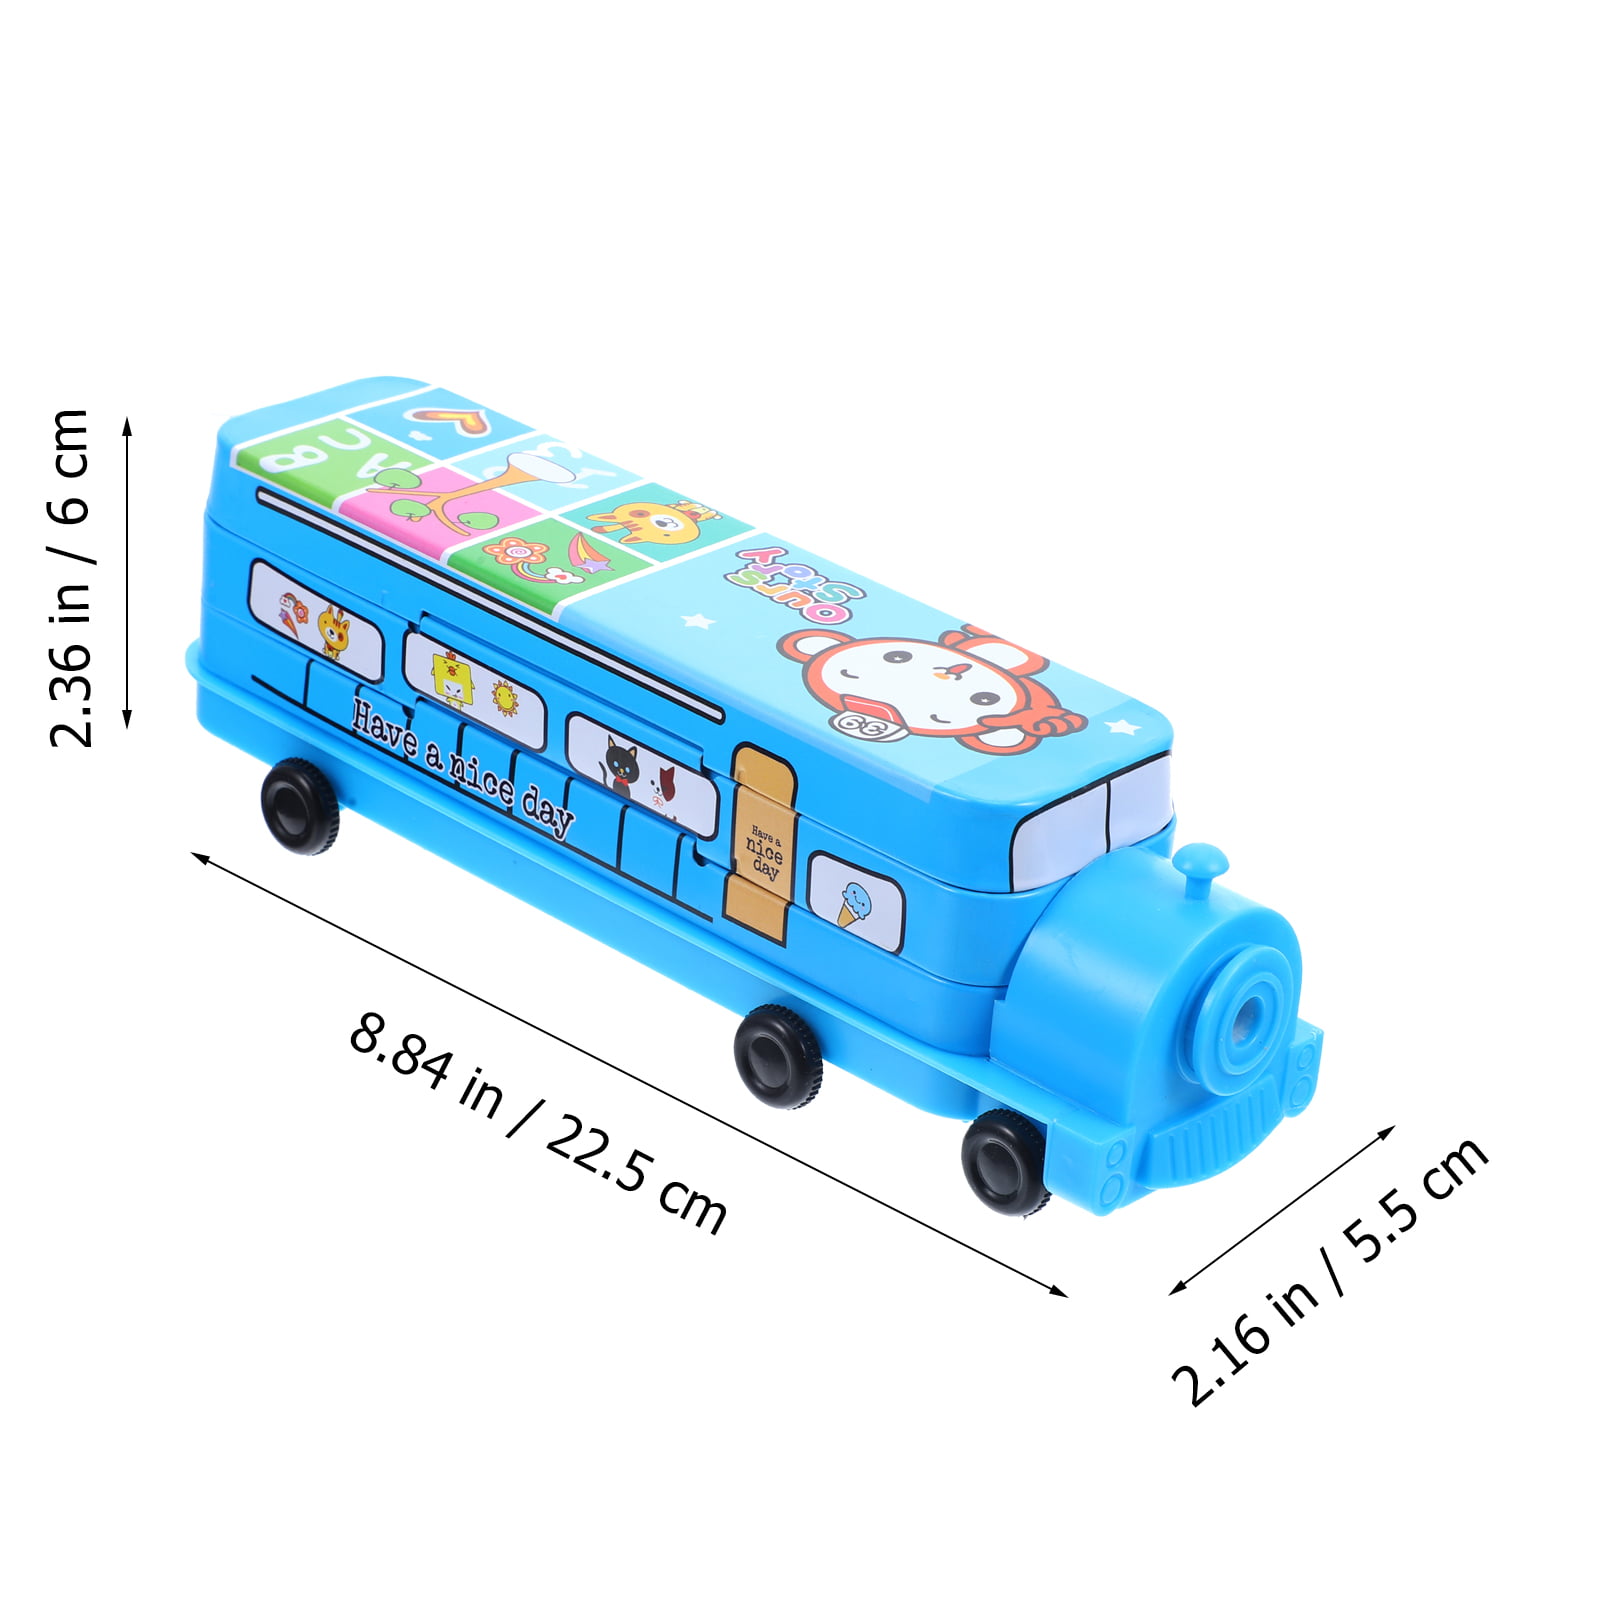 1pc Creative Tiny Train Double-layer Pencil Case With Pencil Sharpener  Cartoon Toy Pencil Box For Student Kids Stationery Boxes - Pencil Cases -  AliExpress